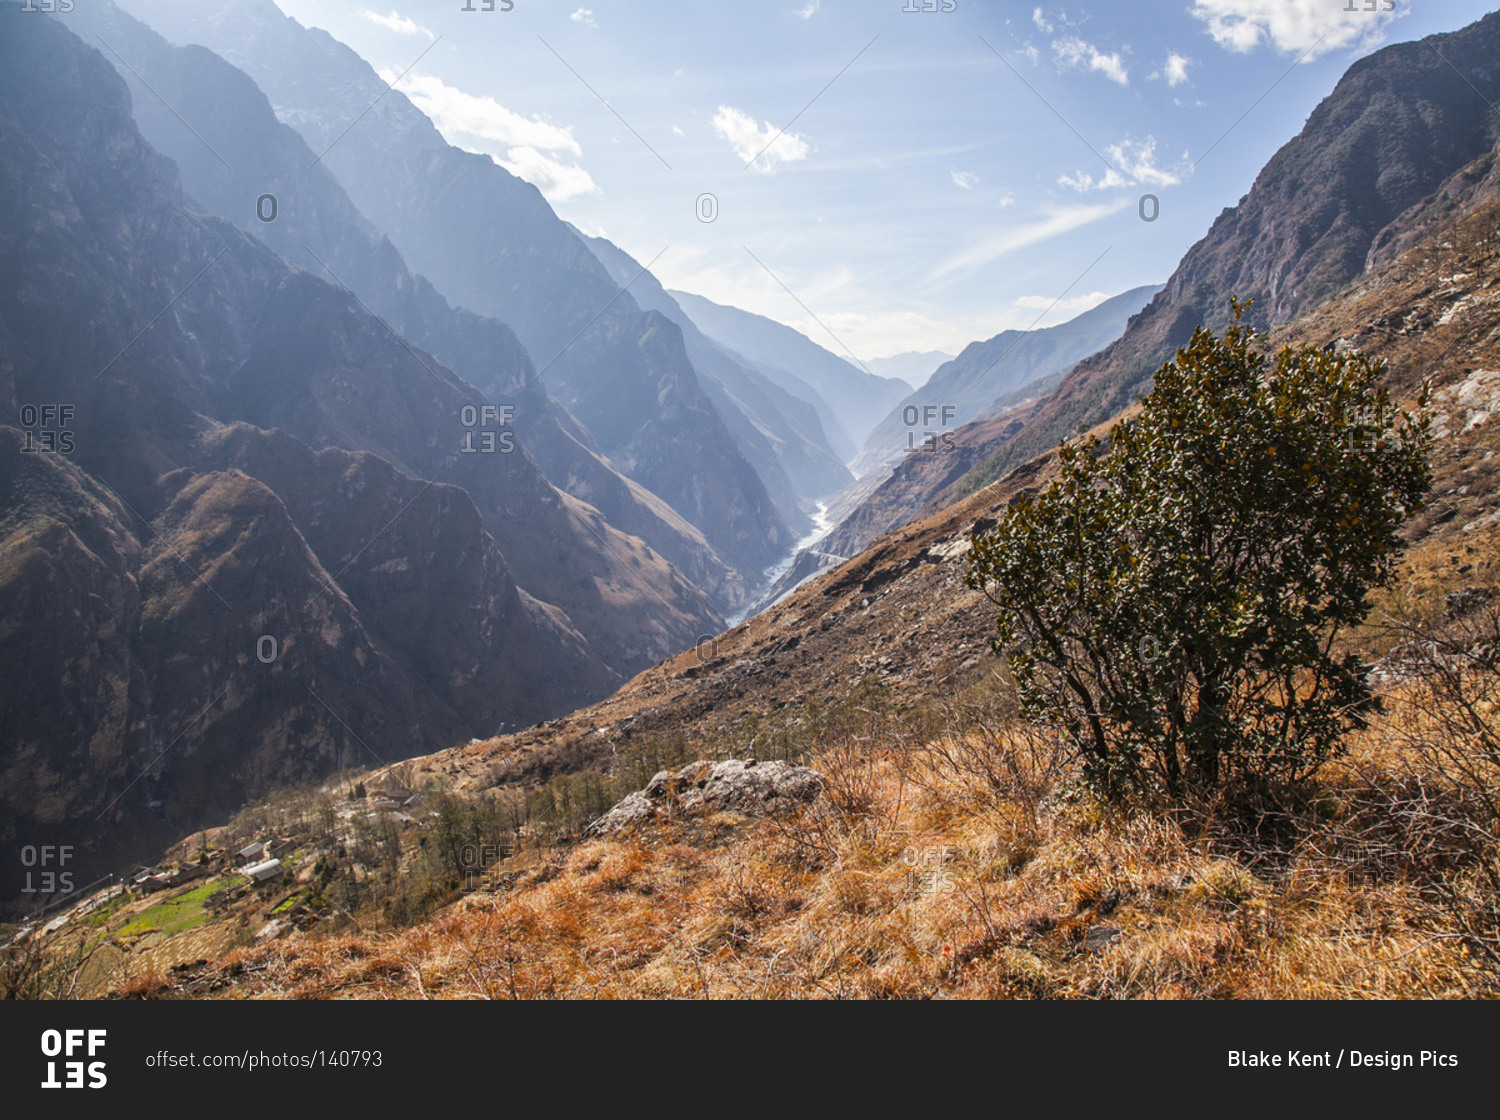 Tiger Leaping Gorge, the deepest river canyon, Yunnon Province, China